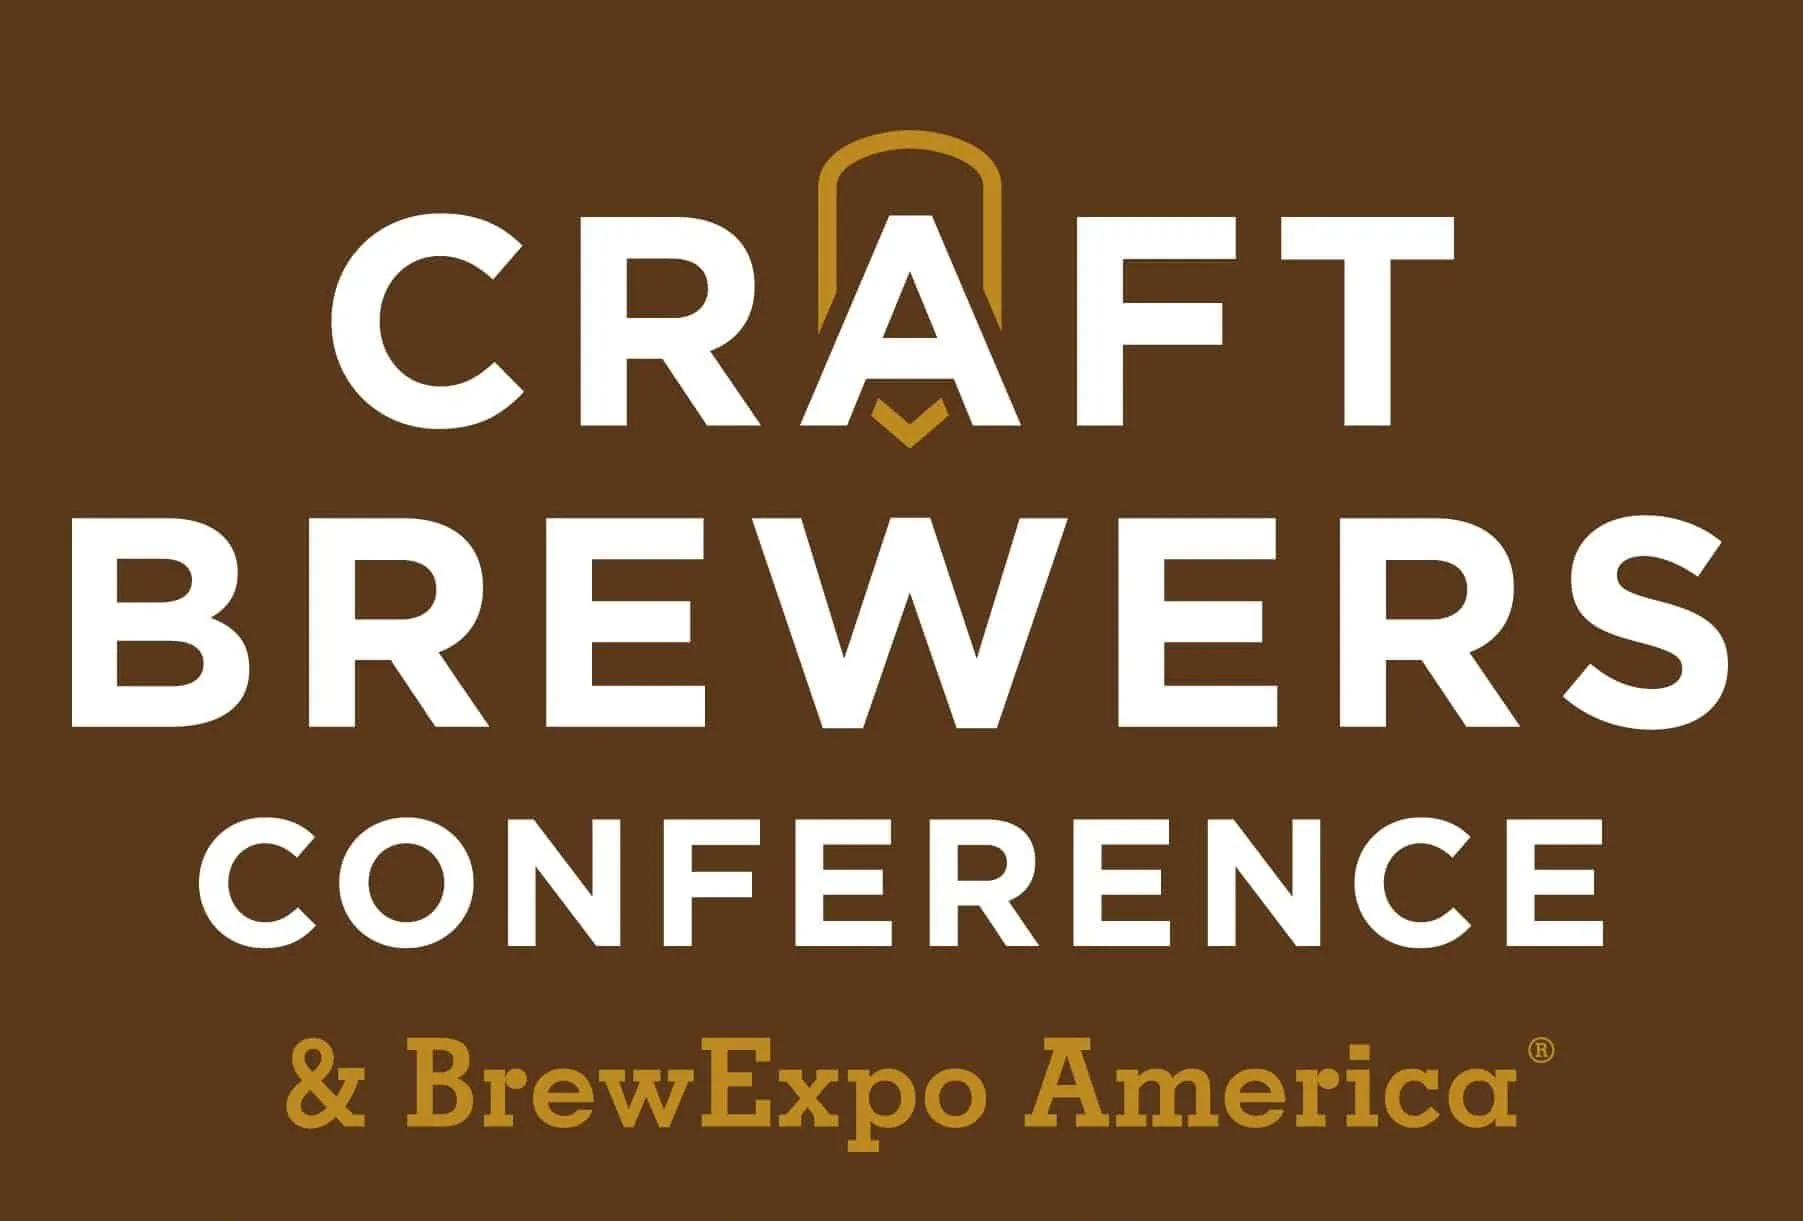 Ziemann Holvrieka at the Craft Brewers Conference & BrewExpo America 2022 – Focus on mashing and tank construction